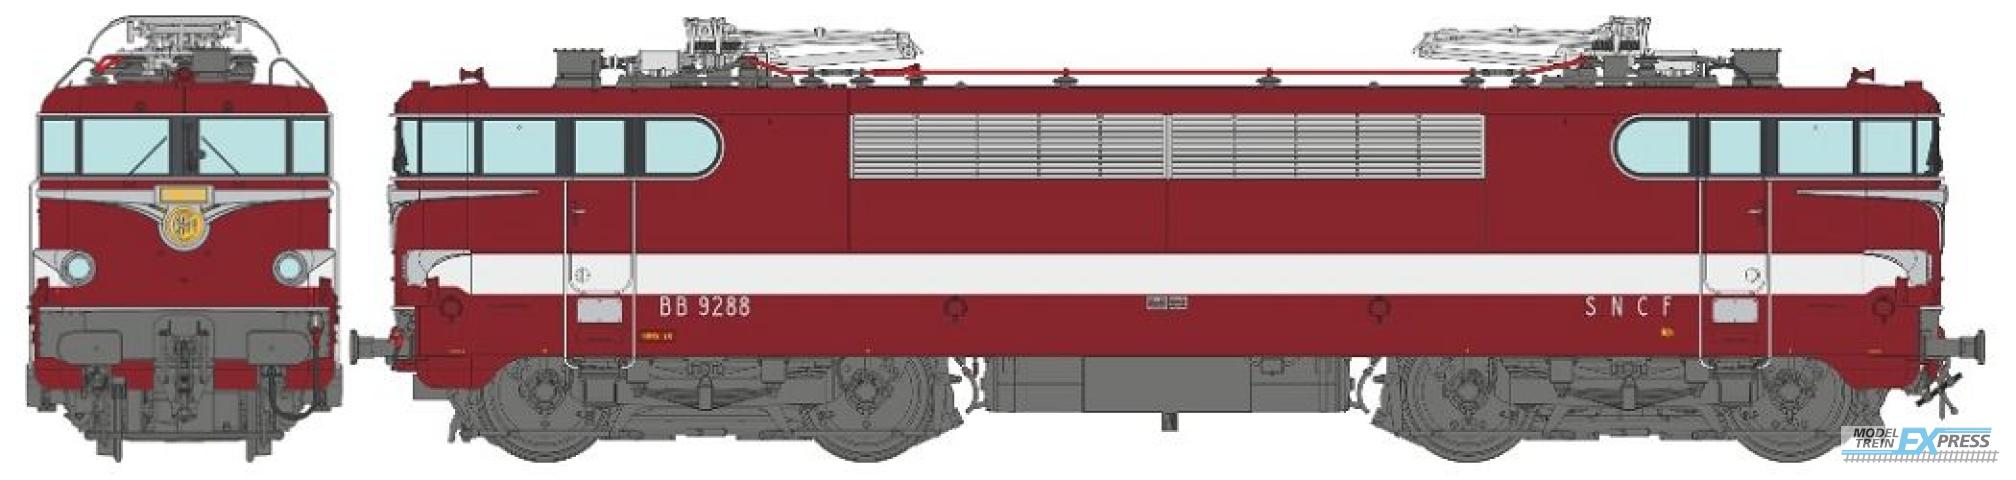 REE models MB-082SAC BB 9288 Red Color "LE CAPITOLE", Era IV - AC Sound Functional Pantos (3 tracks)